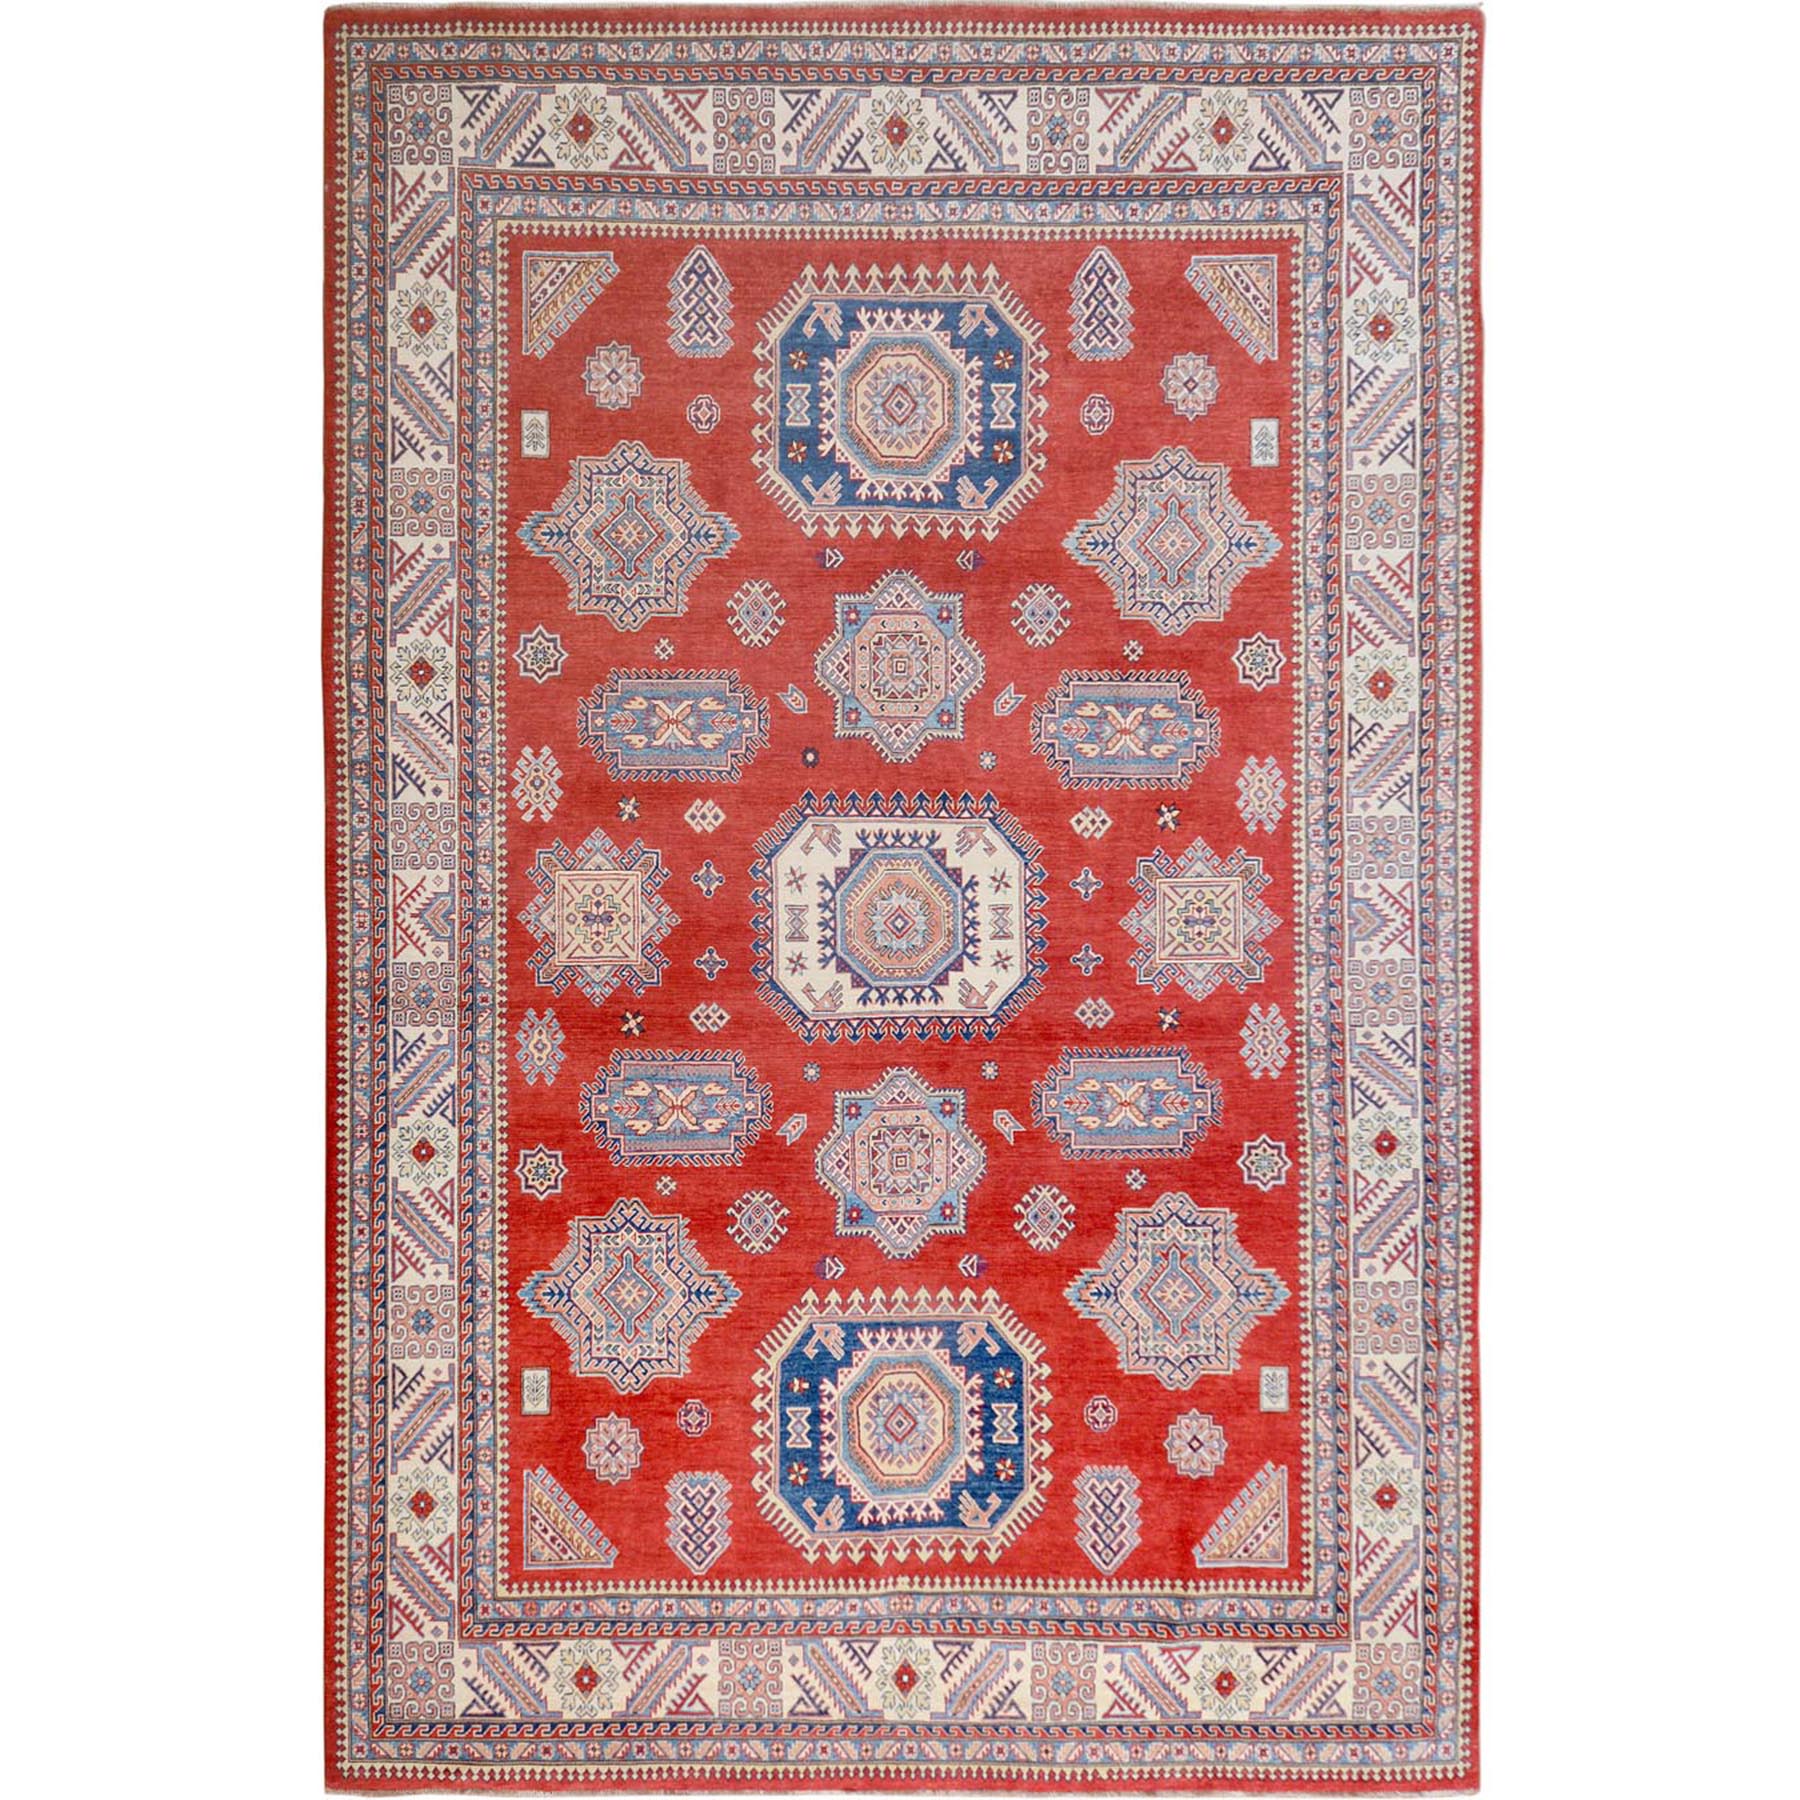 10'X13'10" Red Special Kazak All Over Design Pure Wool Hand Knotted Oriental Rug moae70b6